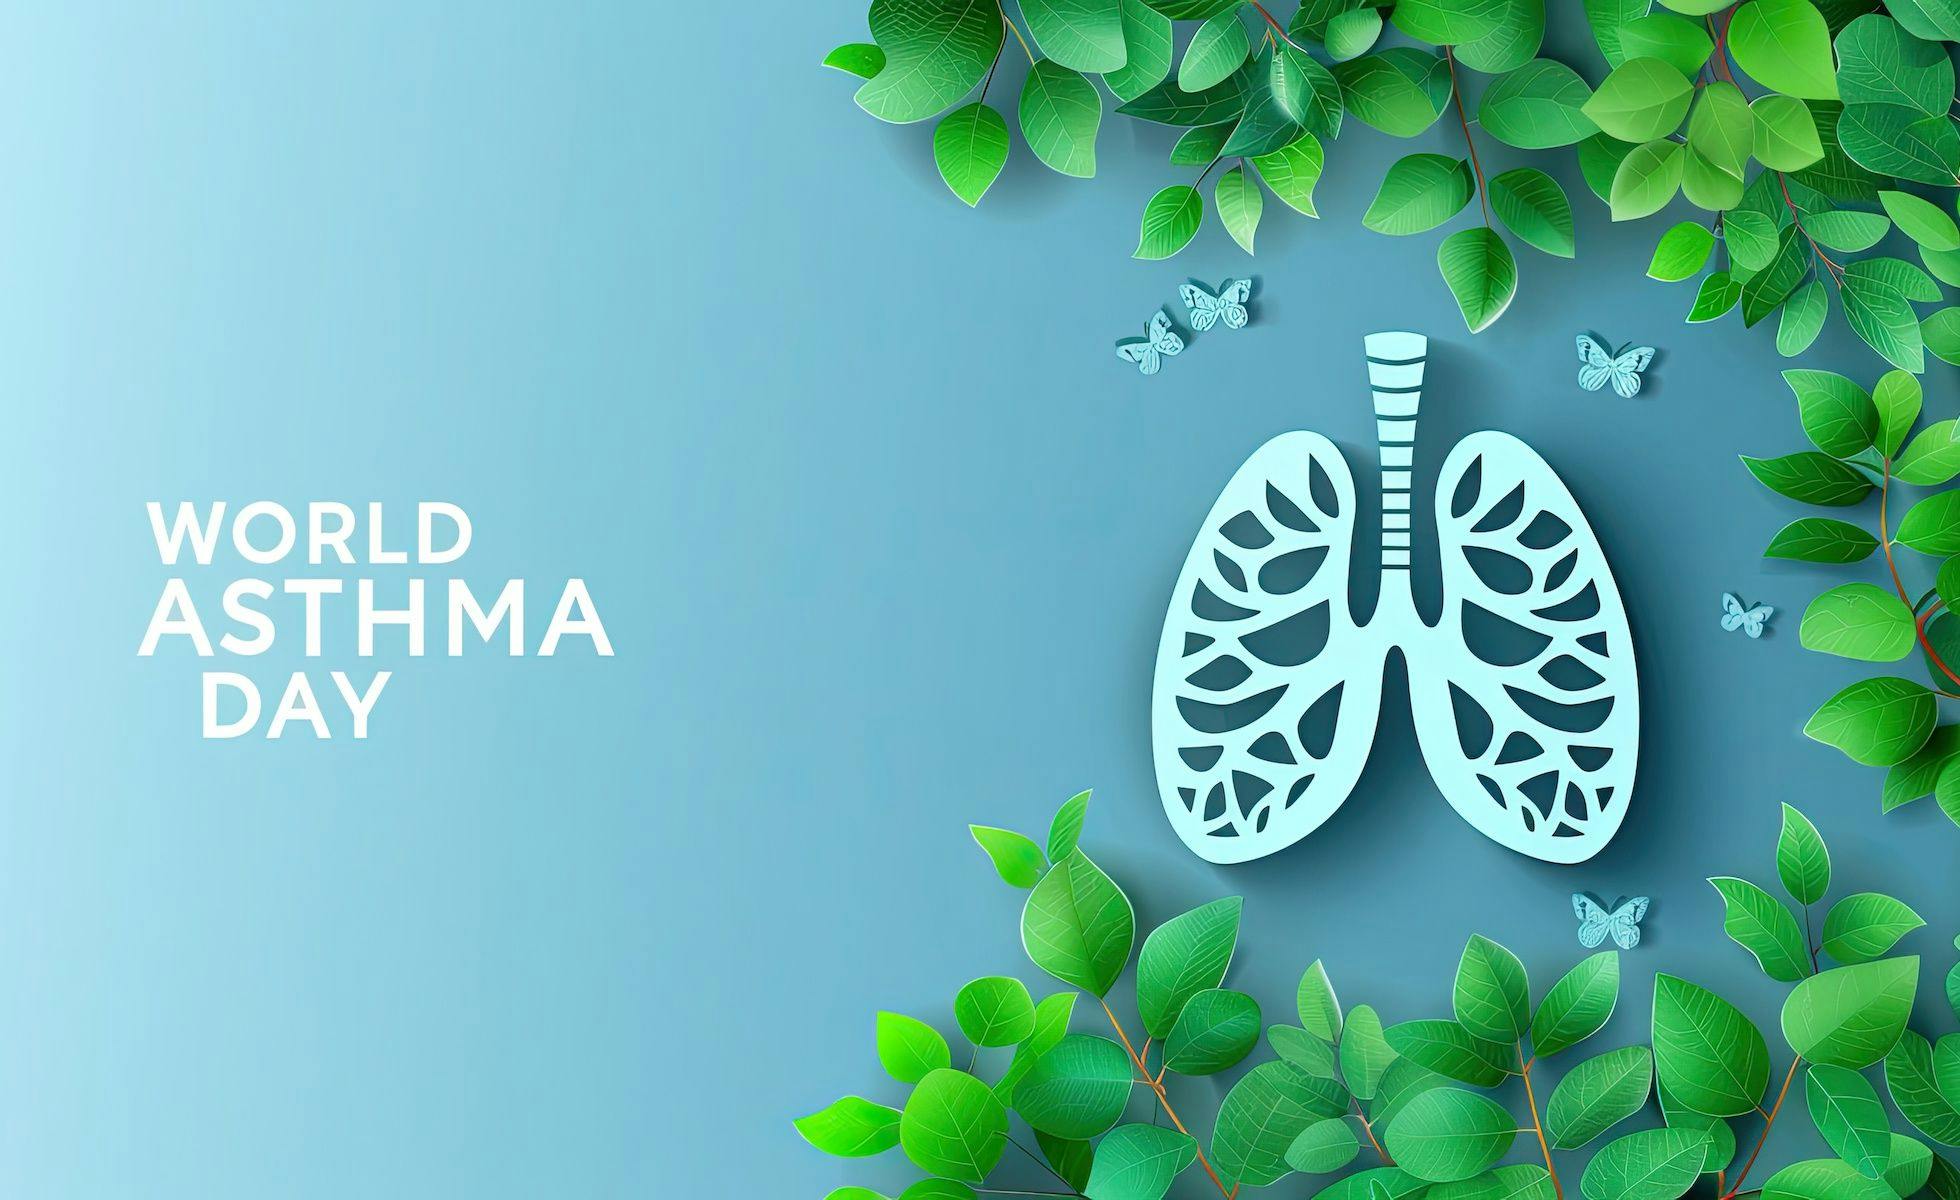 American Thoracic Society Addresses Issues in Asthma Awareness